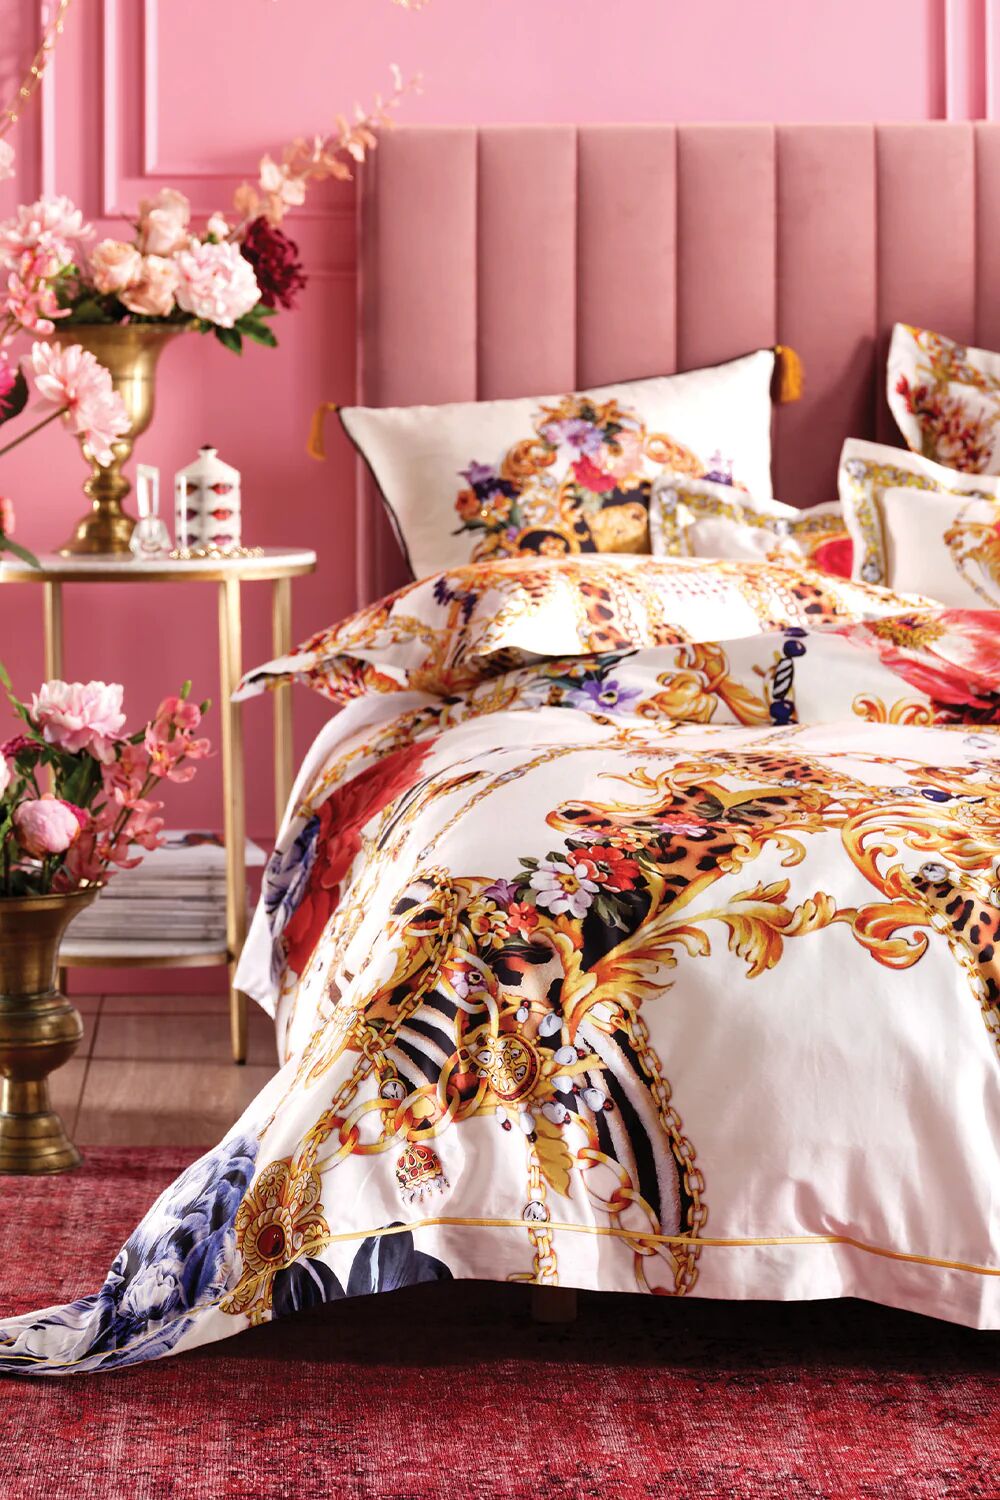 Camilla eBoutique Quilt Cover Set Reign Supreme, QUEEN BED  - Size: QUEEN BED